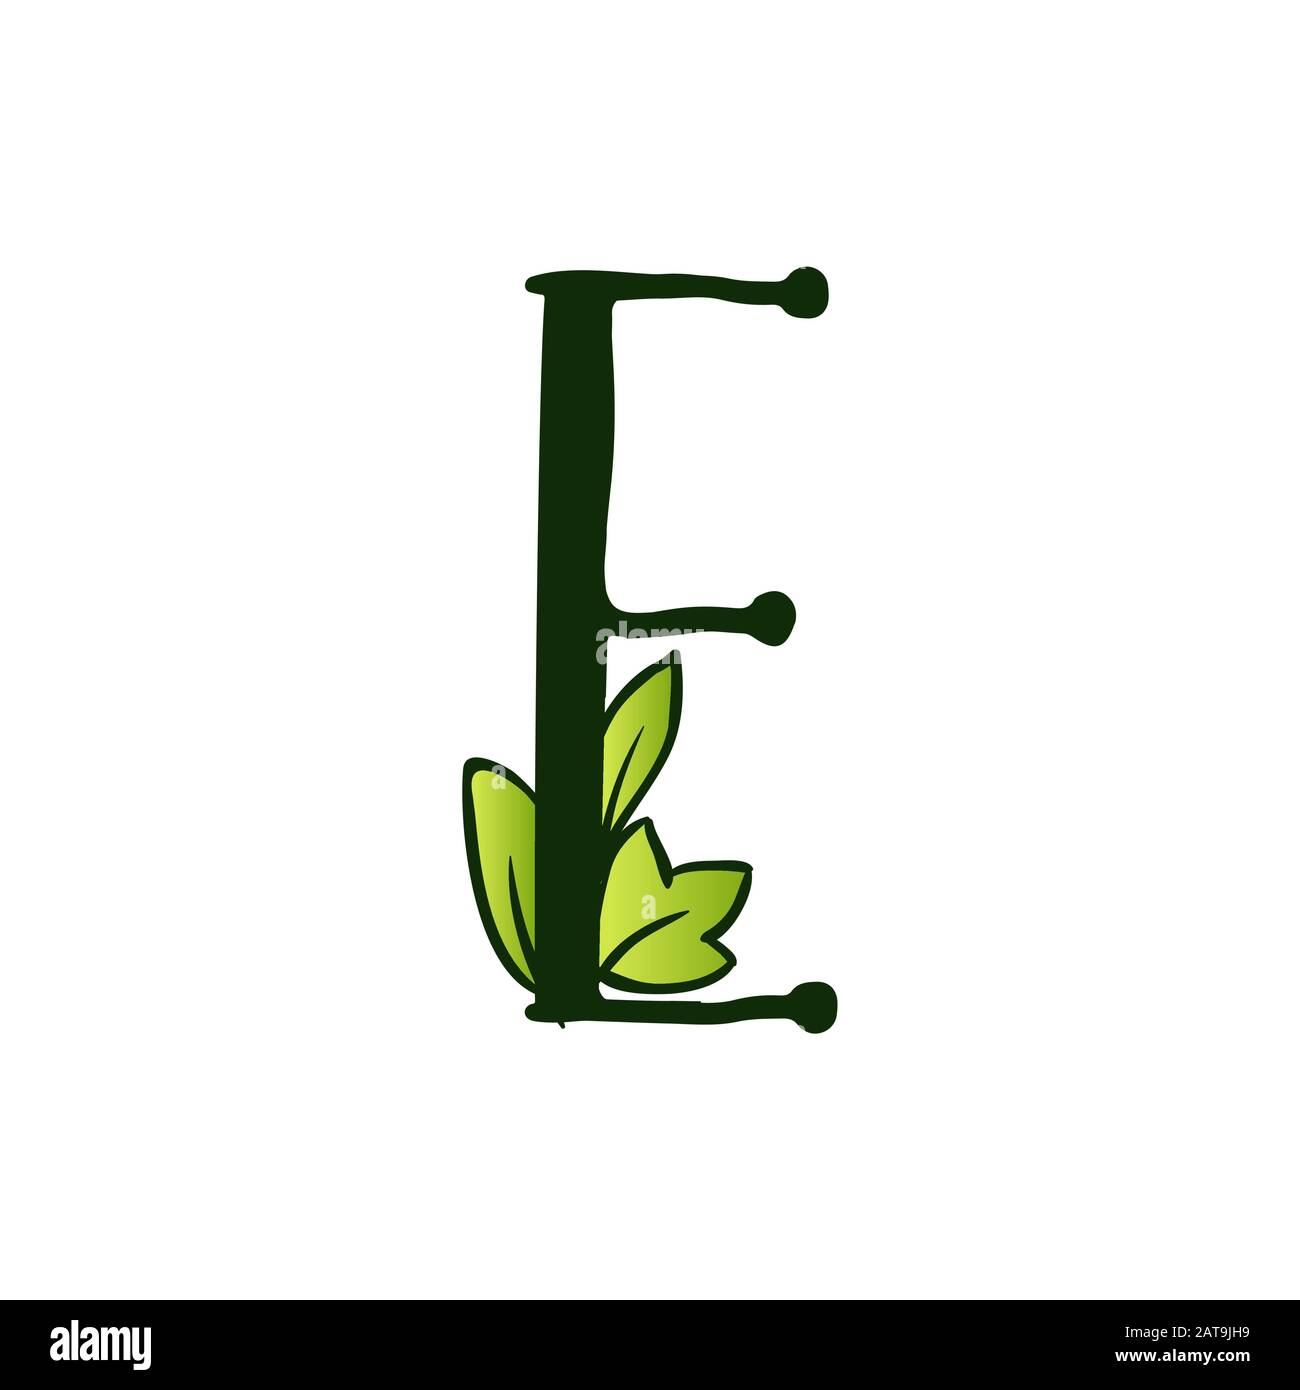 Green Doodling Eco Alphabet Letter E.Type with Leaves. Isolated Latin Uppercase. Typography Bold Spring Letter or Doodle abc Characters for Monogram Words and Logo. Stock Vector